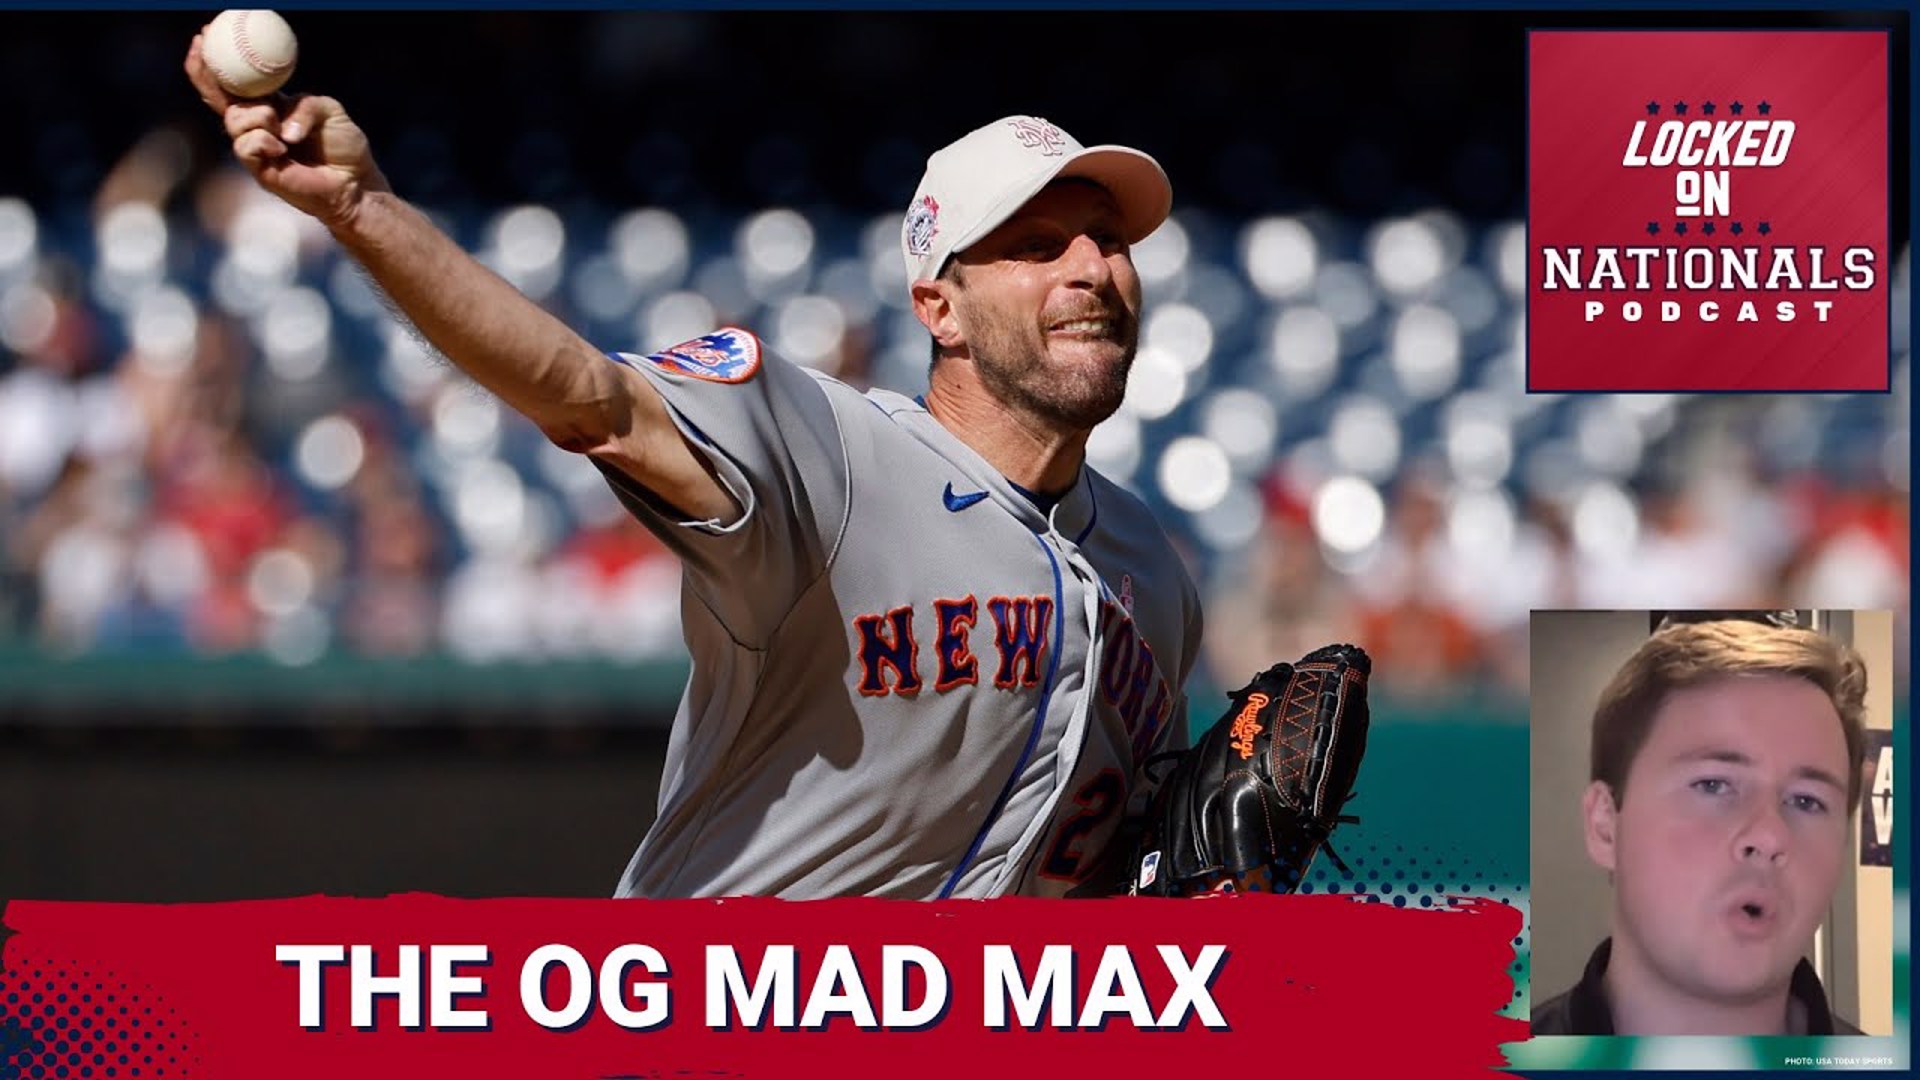 Max Scherzer & the New York Mets dominate the Nats as he inches closer to being the winningest pitcher at Nationals Park.